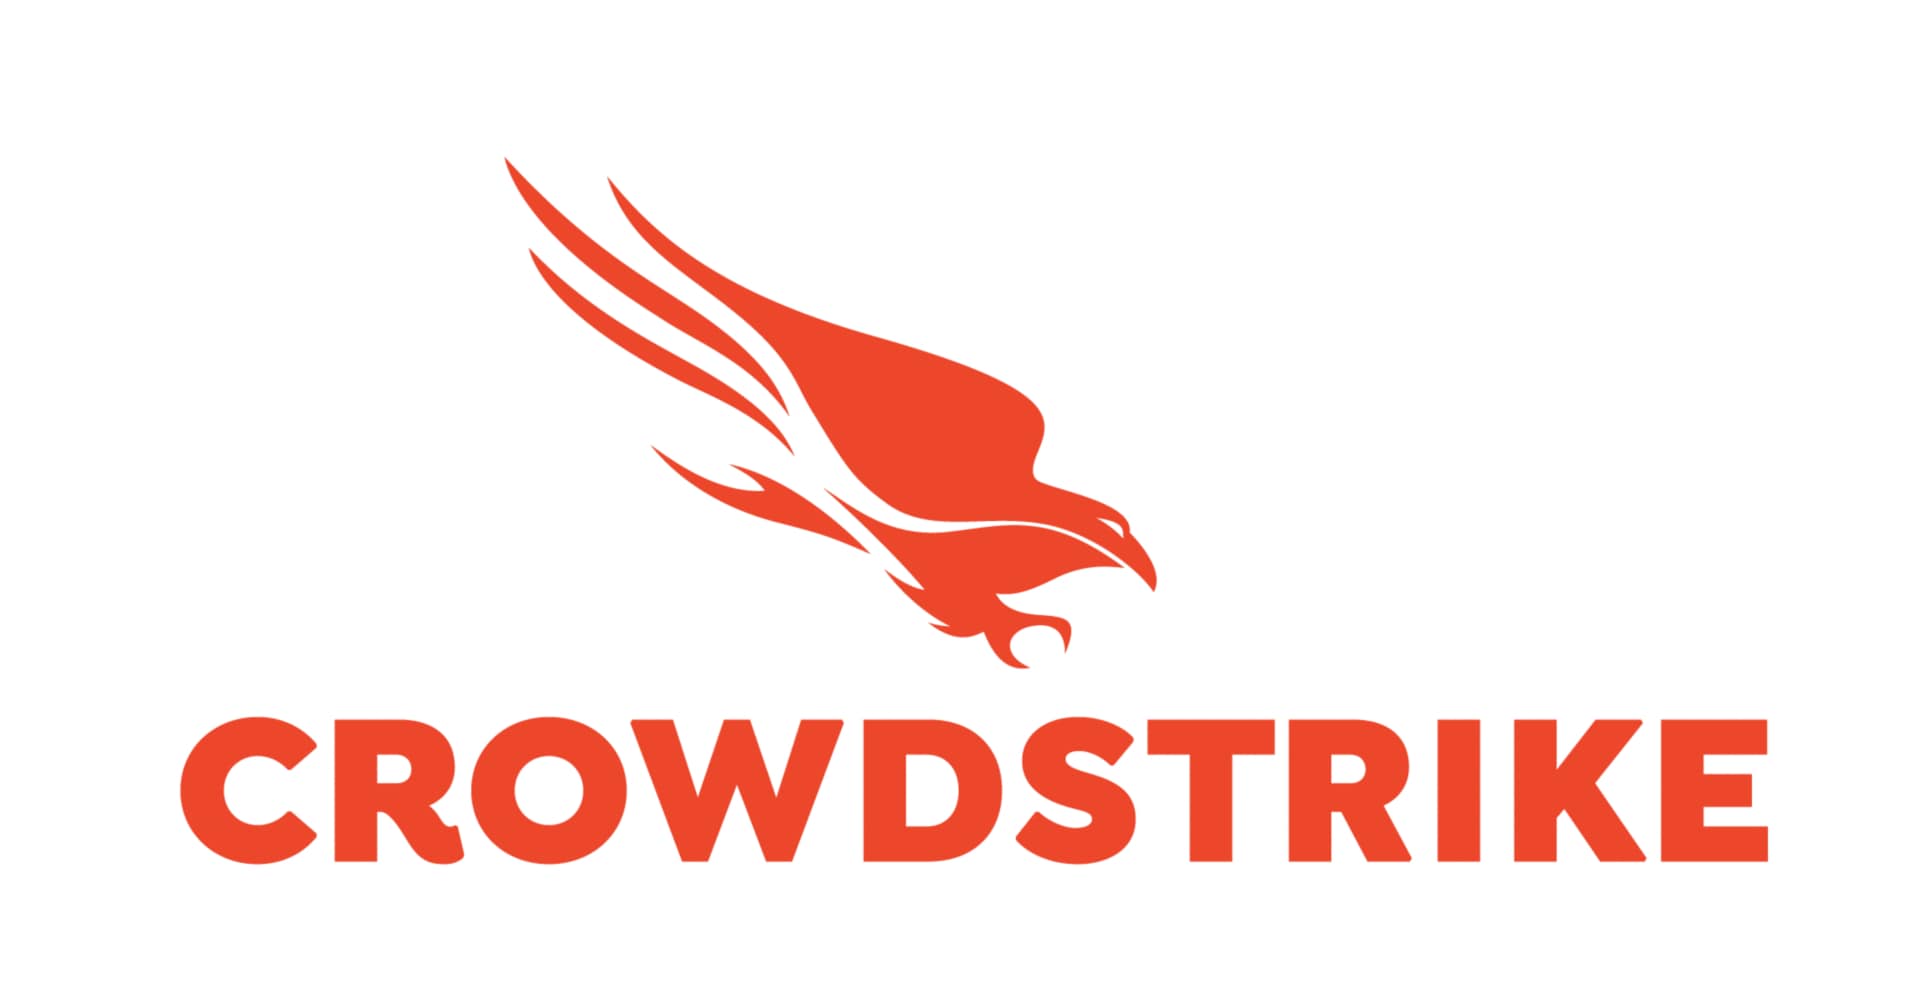 CrowdStrike Threat Graph Extended for Mobile - subscription license (9 mont